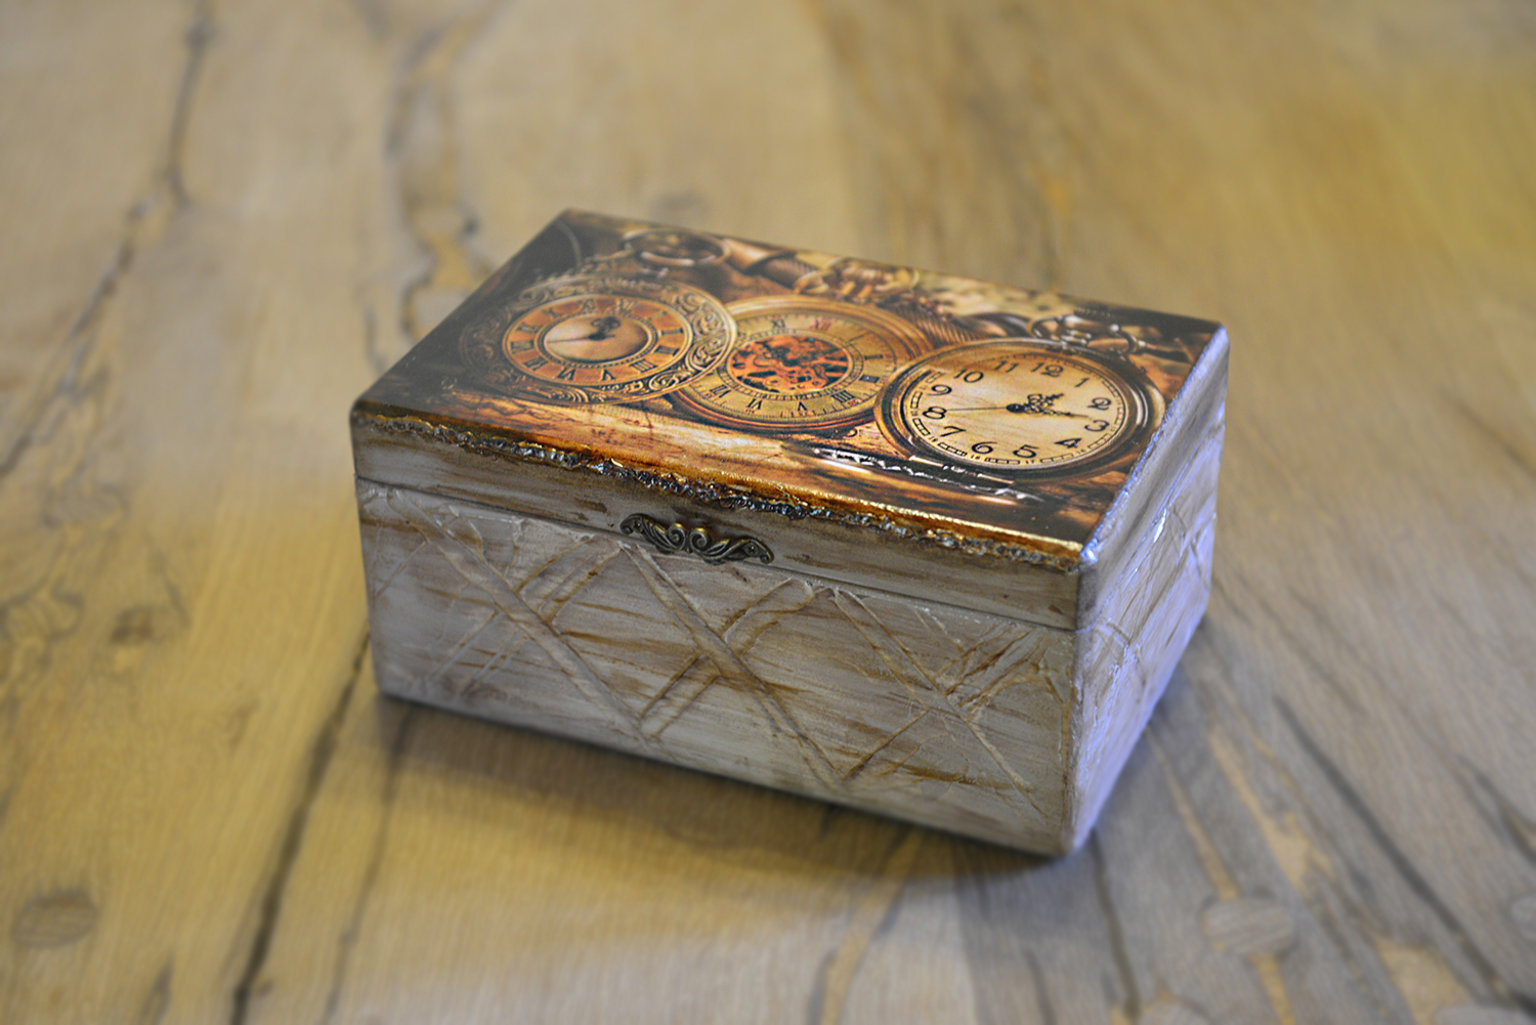 Wooden box with old watches